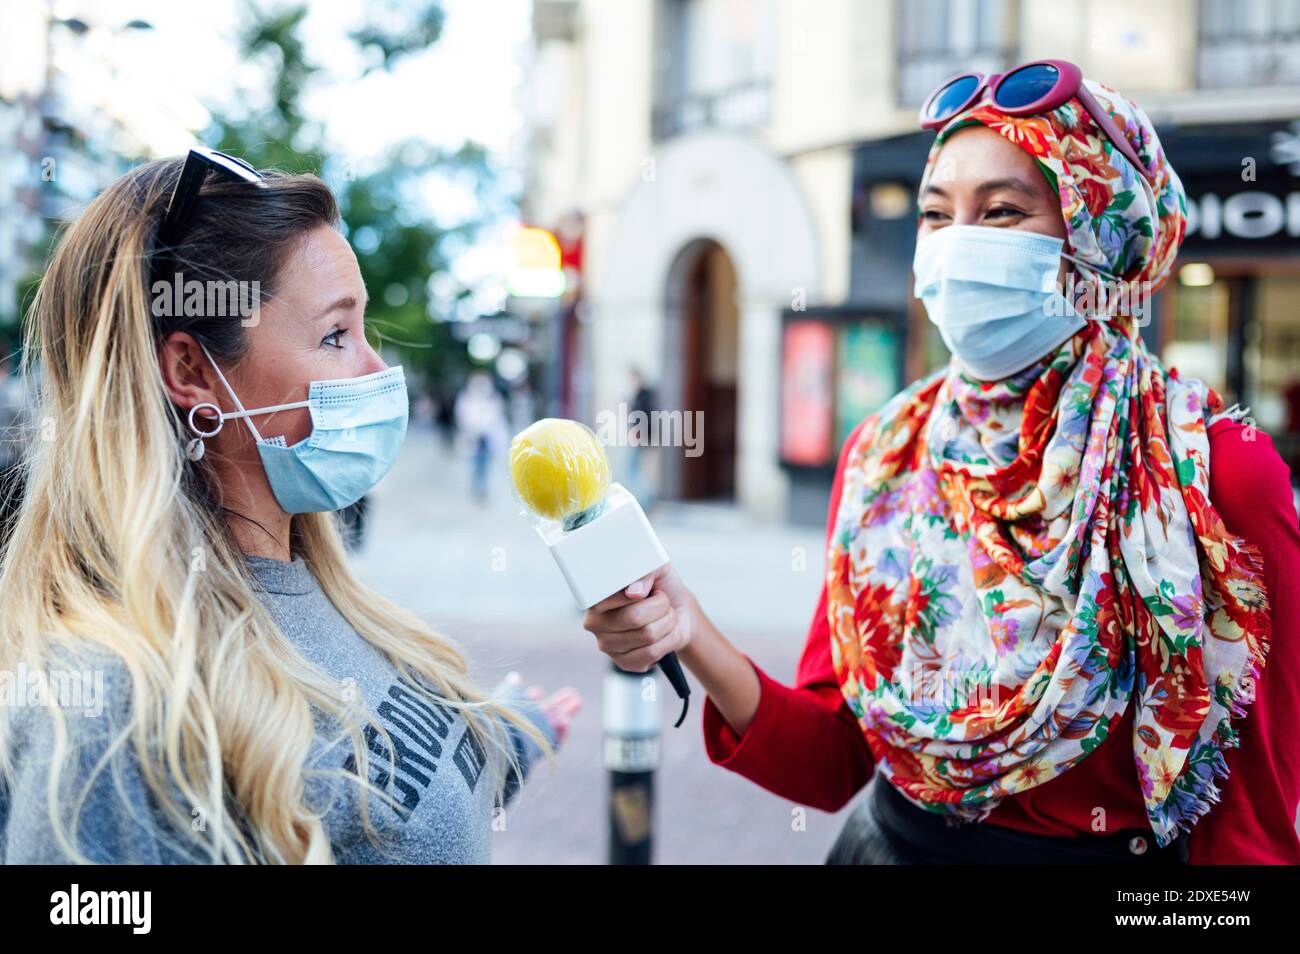 Female journalist interviewing woman with microphone in city during COVID-19 Stock Photo